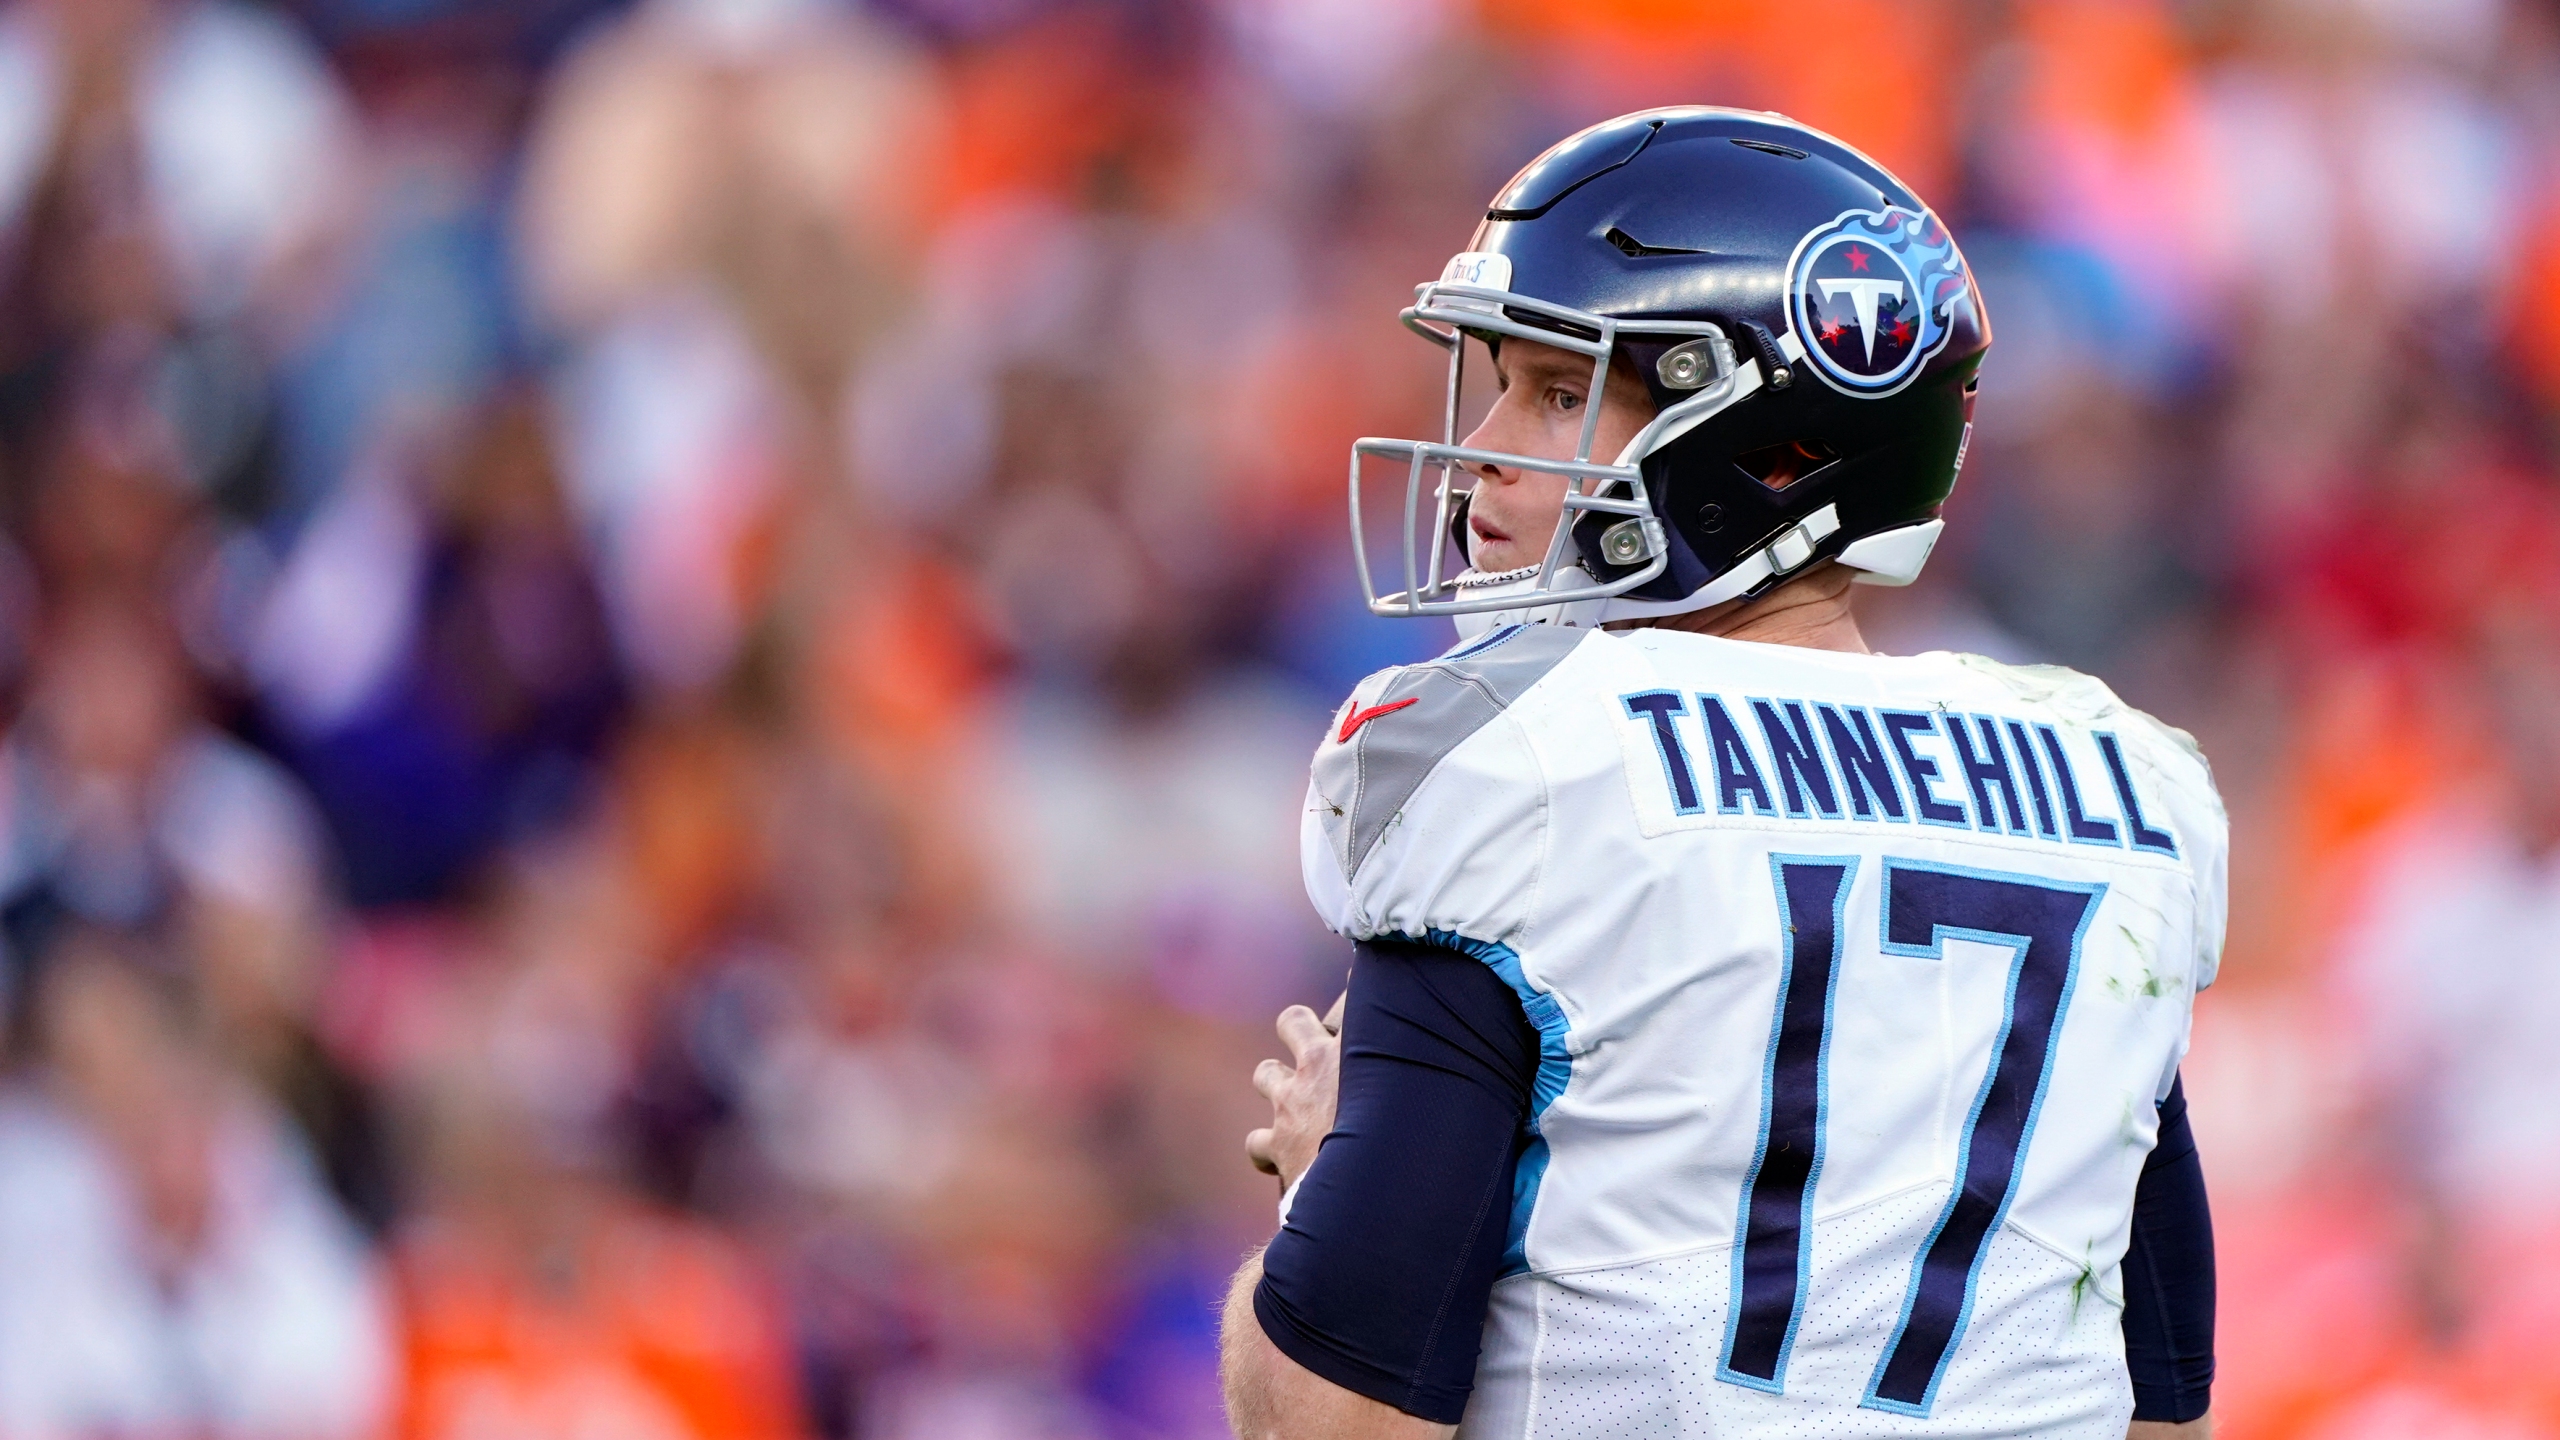 Vrabel: Titans switch to Tannehill at QB looking for spark